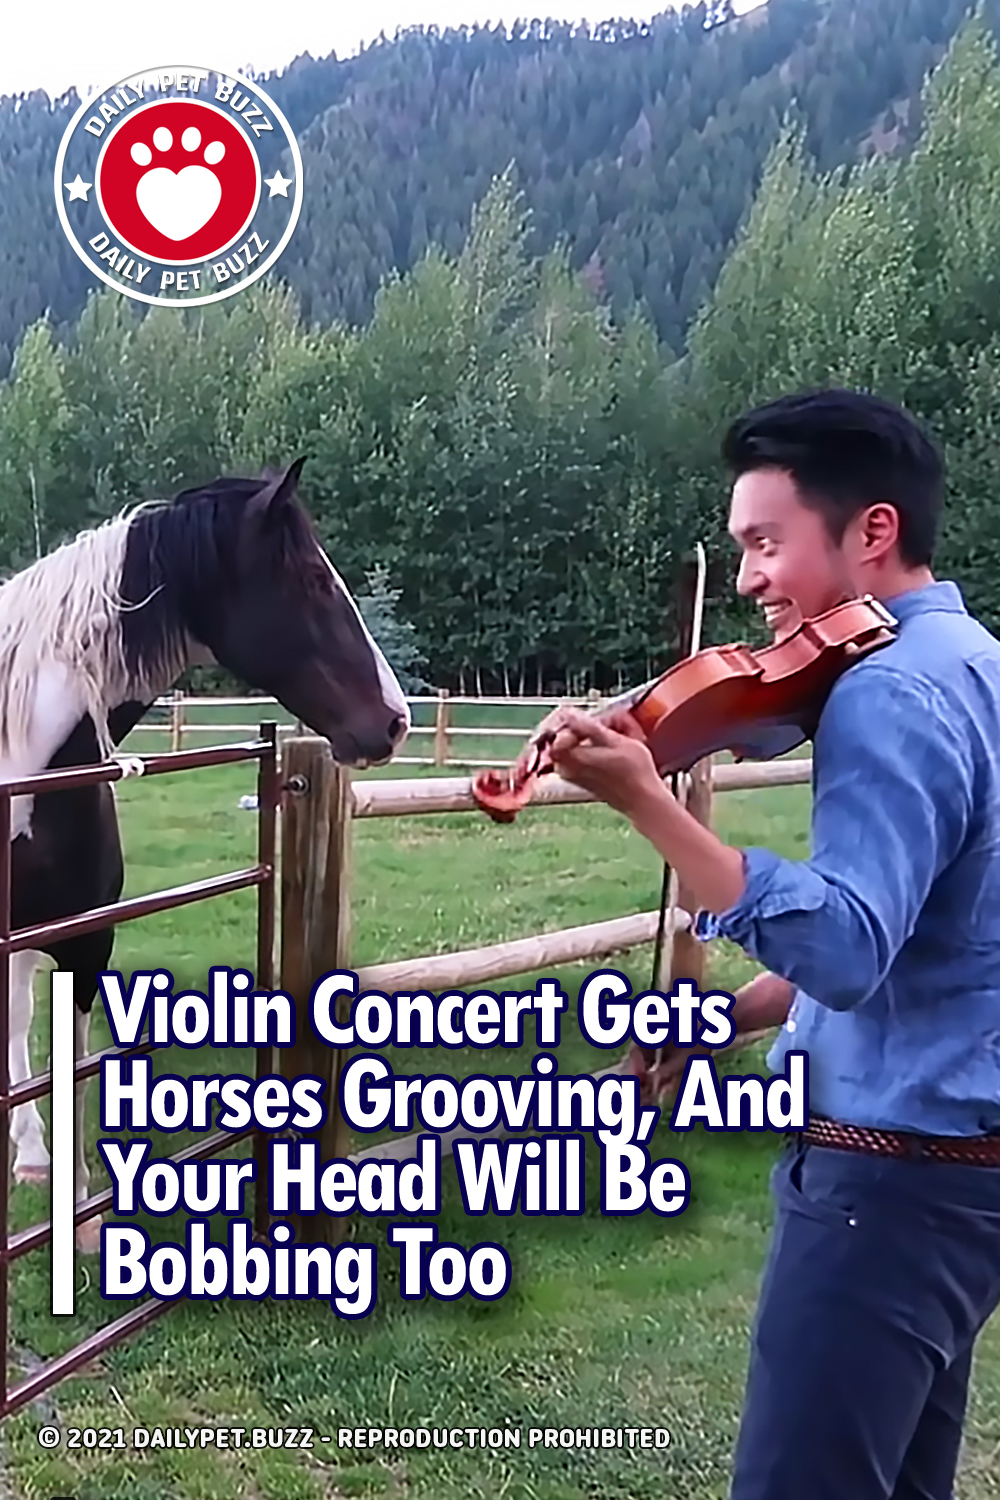 Violin Concert Gets Horses Grooving, And Your Head Will Be Bobbing Too